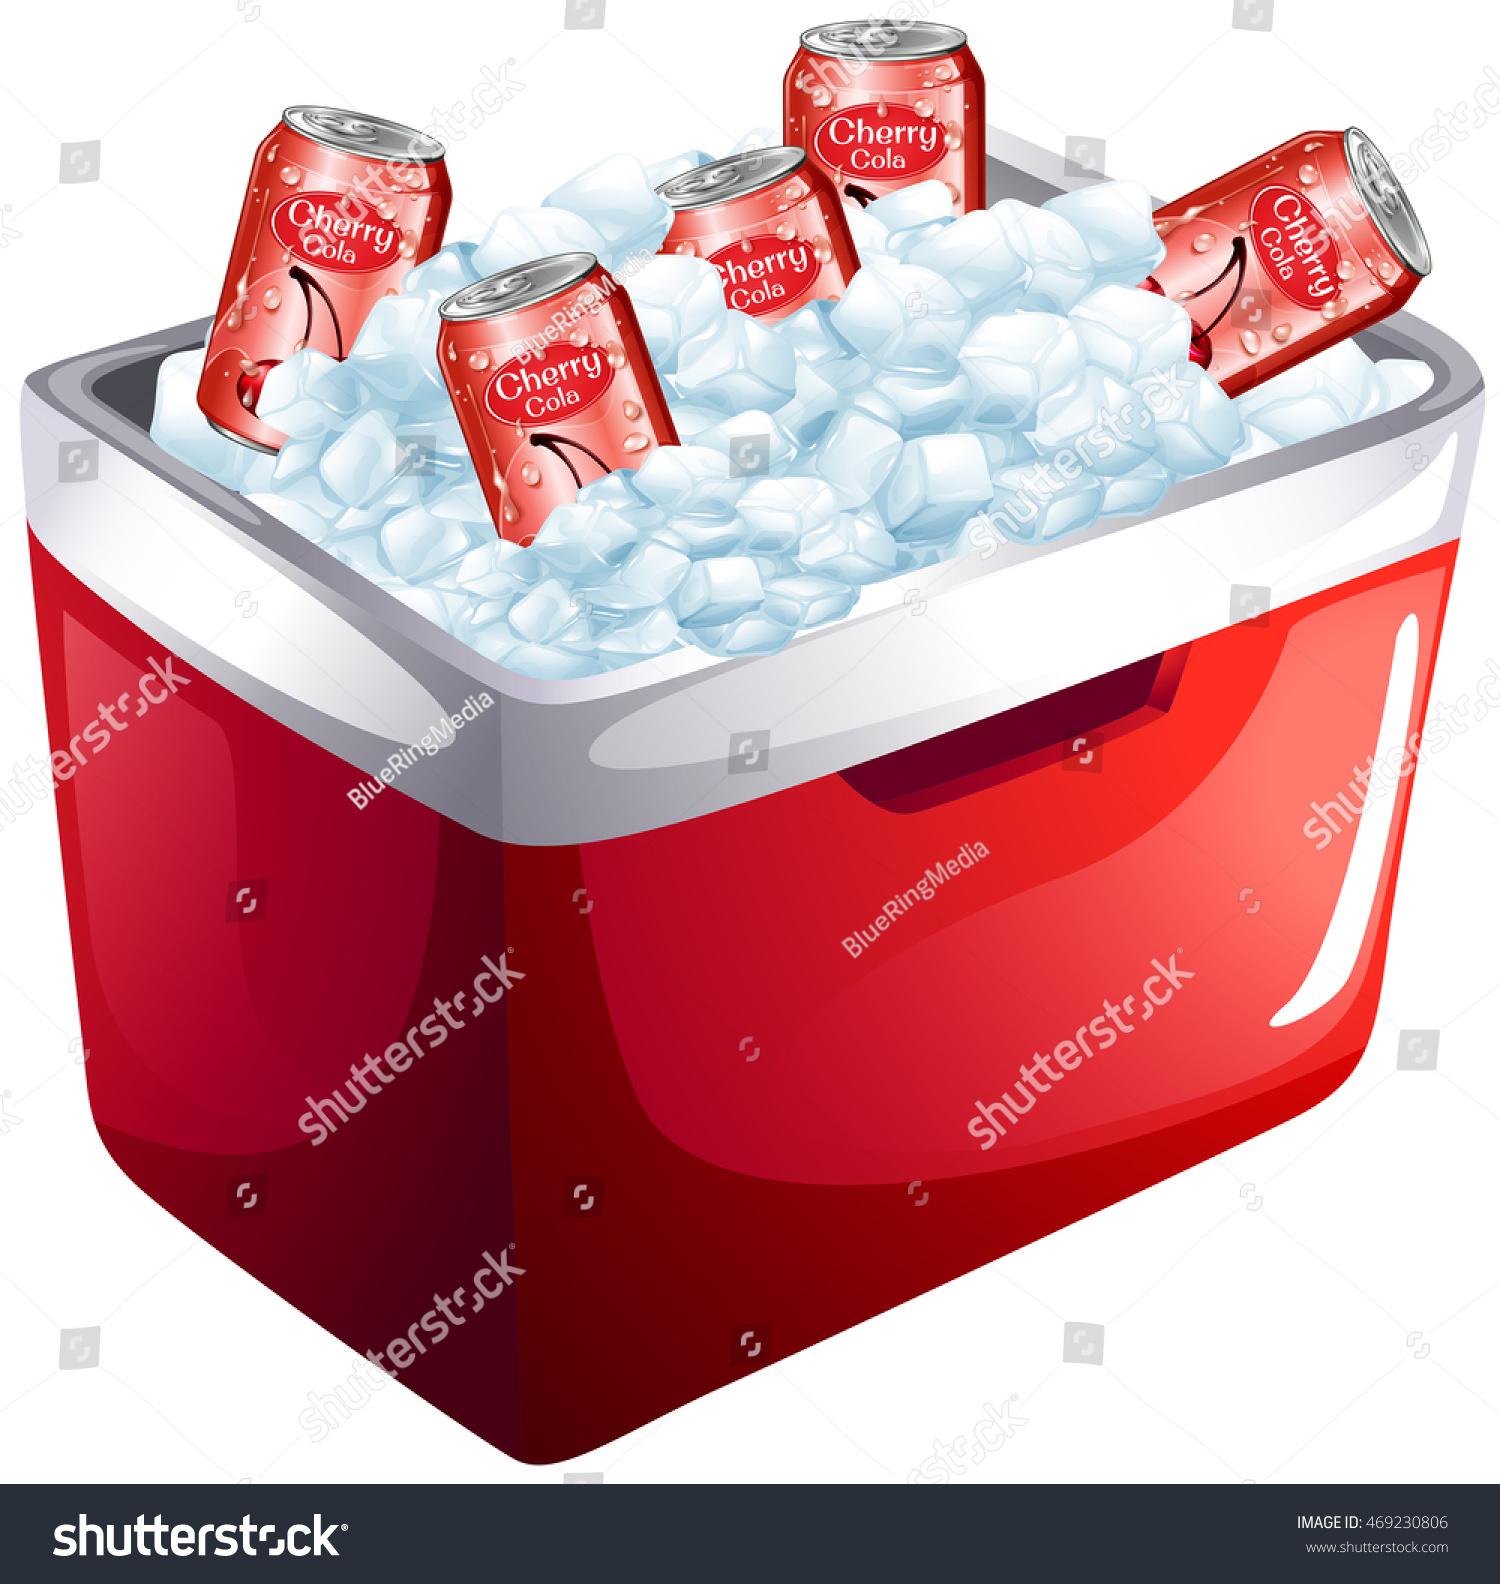 SVG of Cherry soda cans in ice box illustration svg